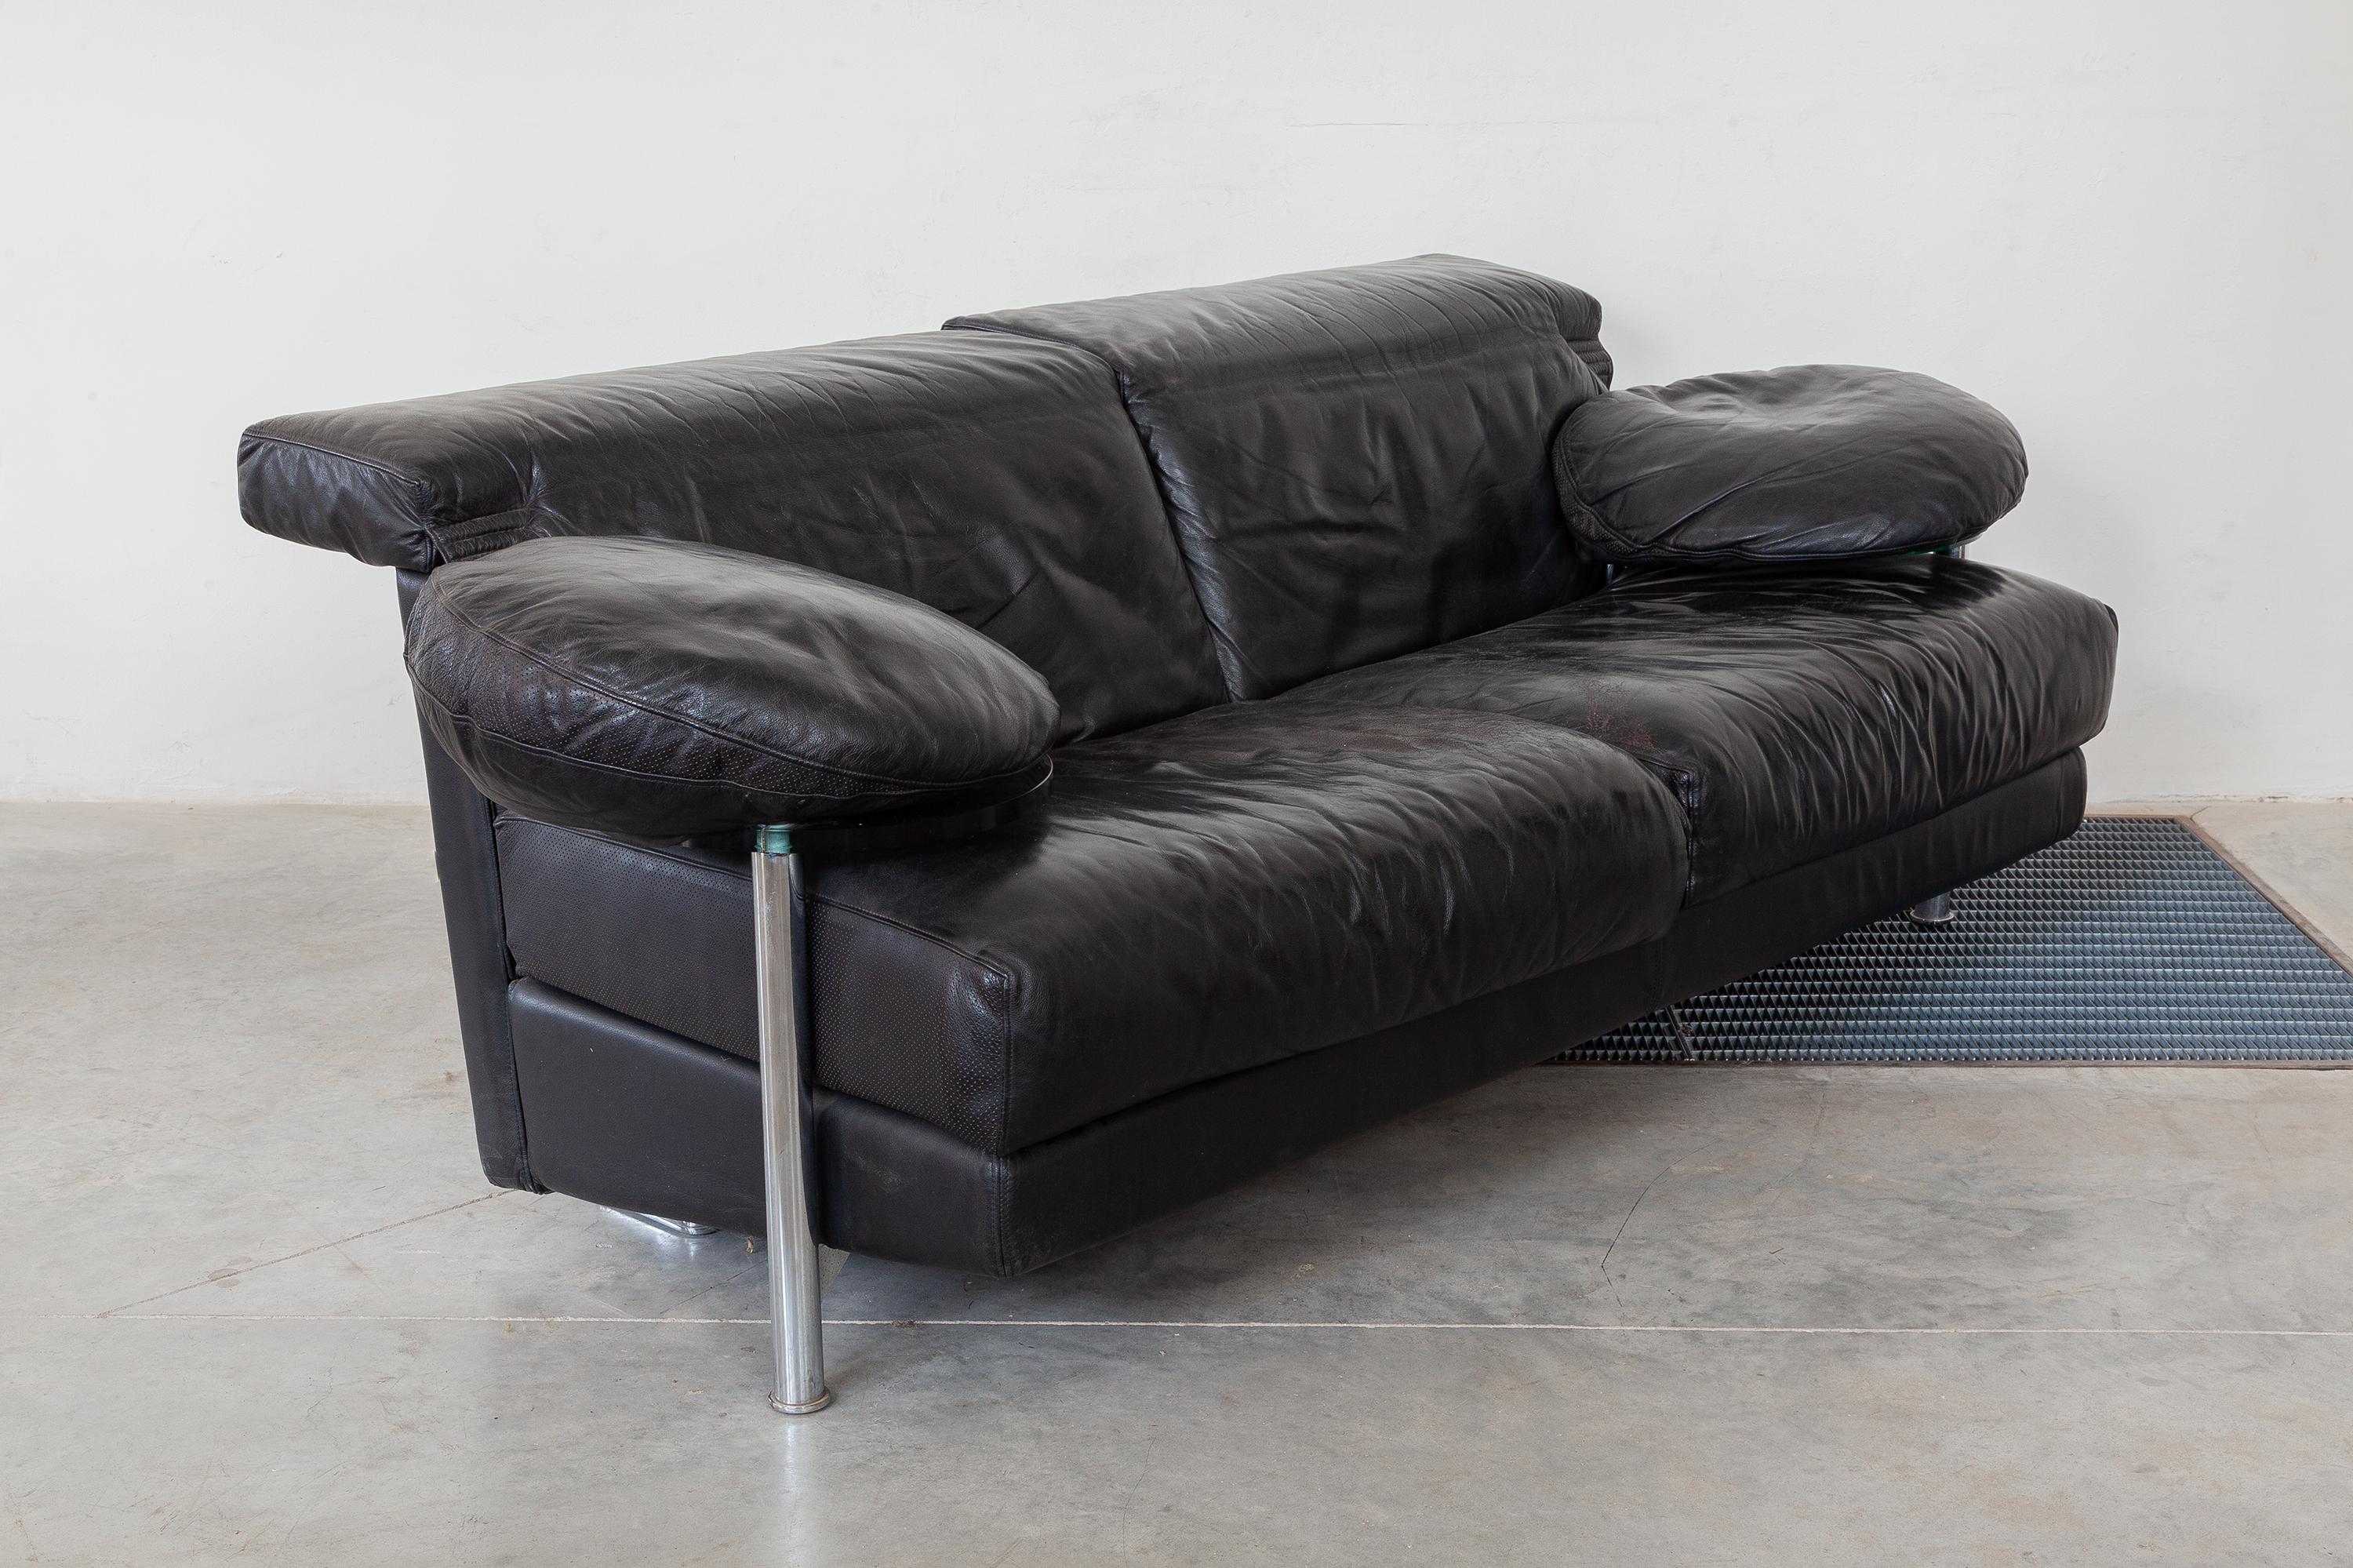 Vintage 1980s two-seat sofa by Paolo Piva for B&B Italia. Black leather upholstery with perforated accents. Circular glass side tables swivel out from under the arm rests. The back rest can be extended or folded down. Dimensions: 210 W x 88 H x 80 D